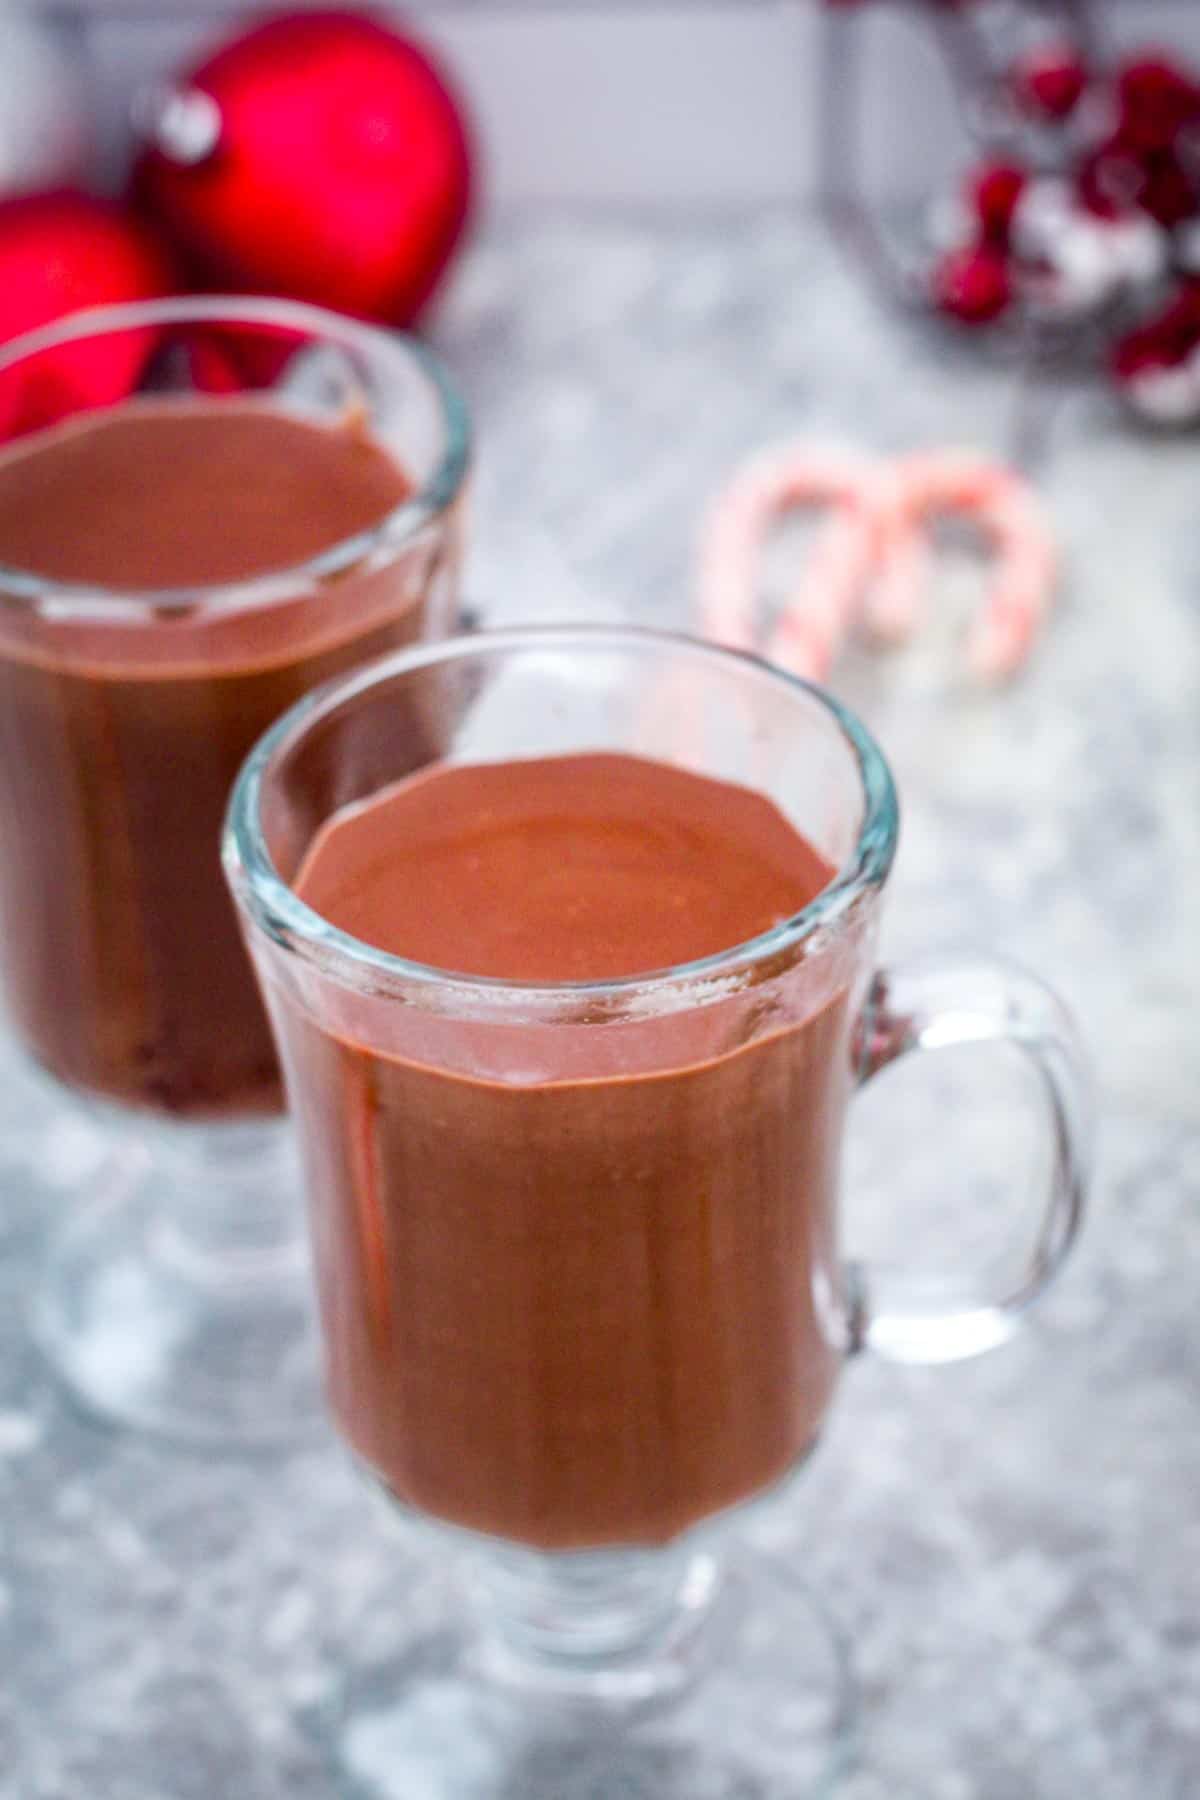 Just poured hot chocolate on a glass, looking thick and luscious. There's no toppings yet or garnishes.